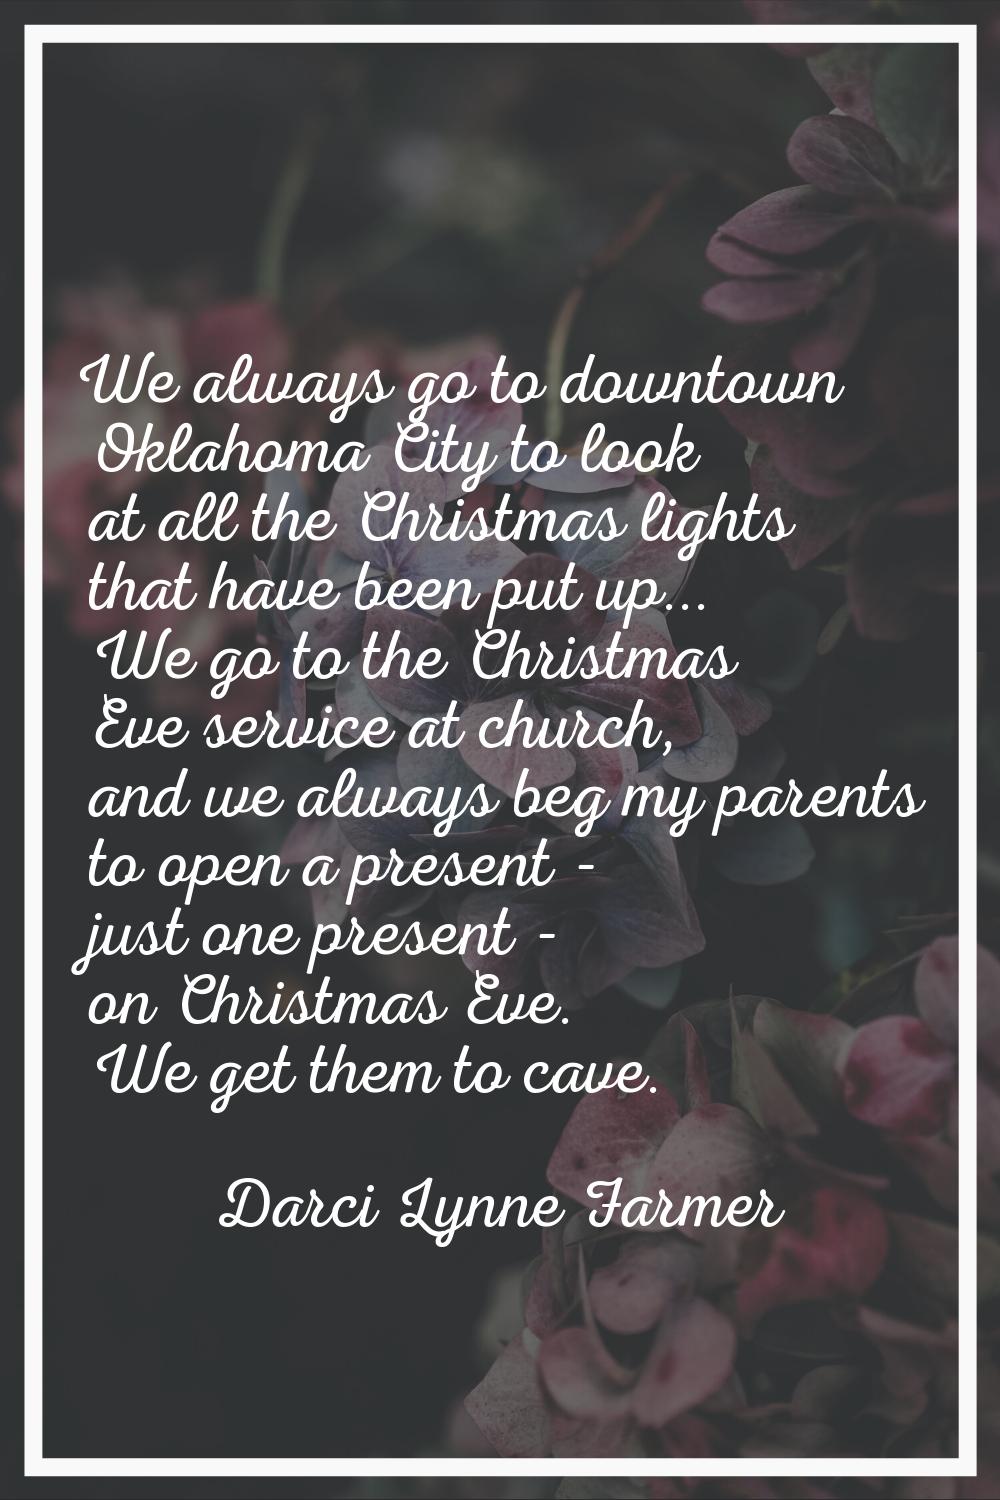 We always go to downtown Oklahoma City to look at all the Christmas lights that have been put up...